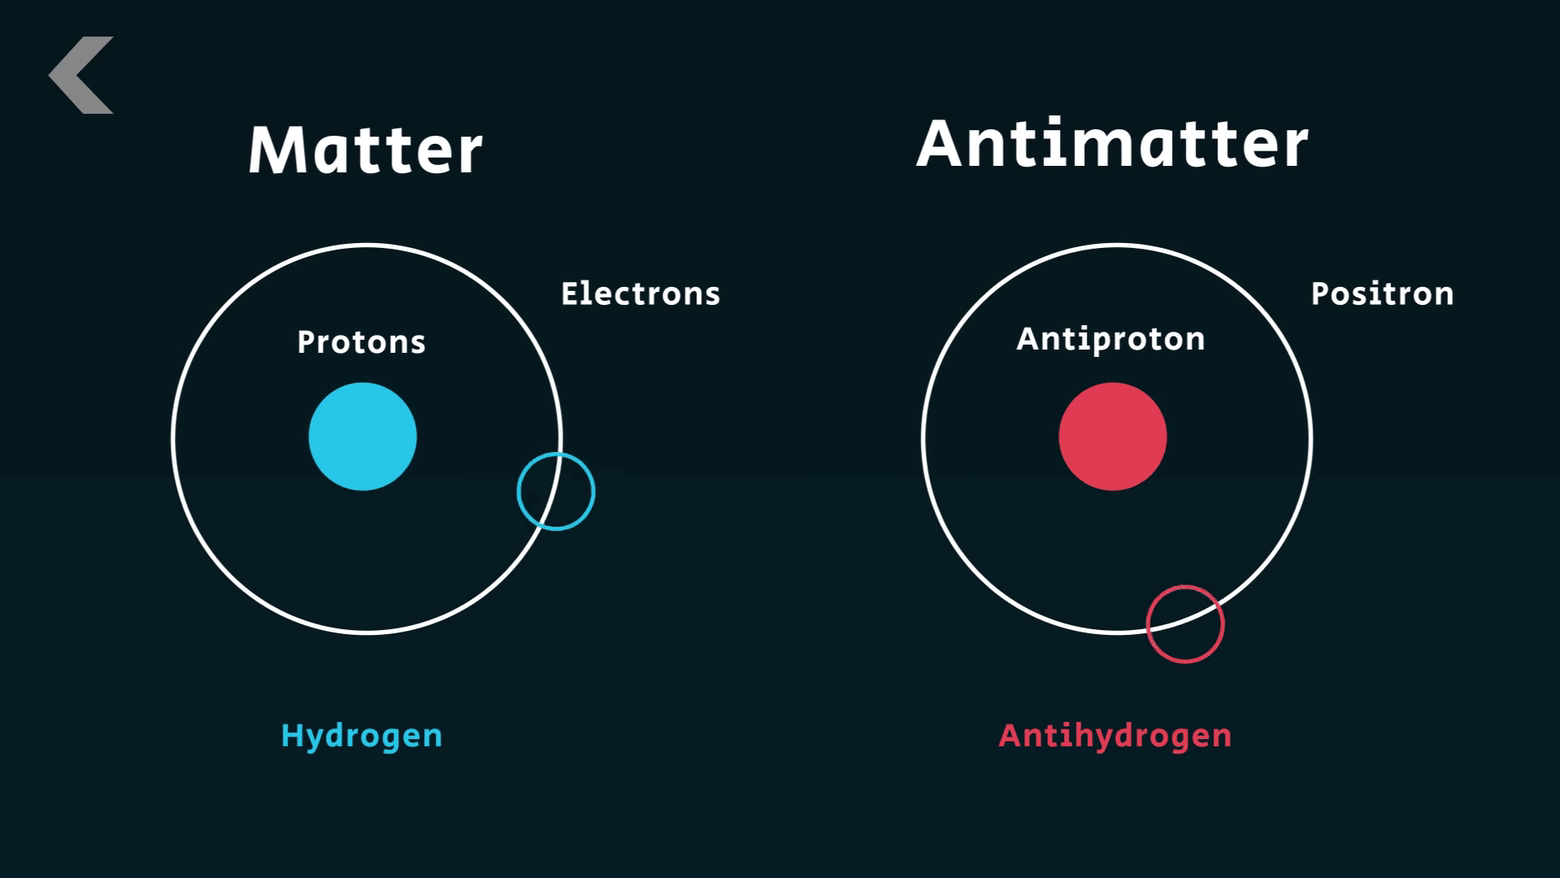 Antimatter - The Long Lost Cousin of Matter